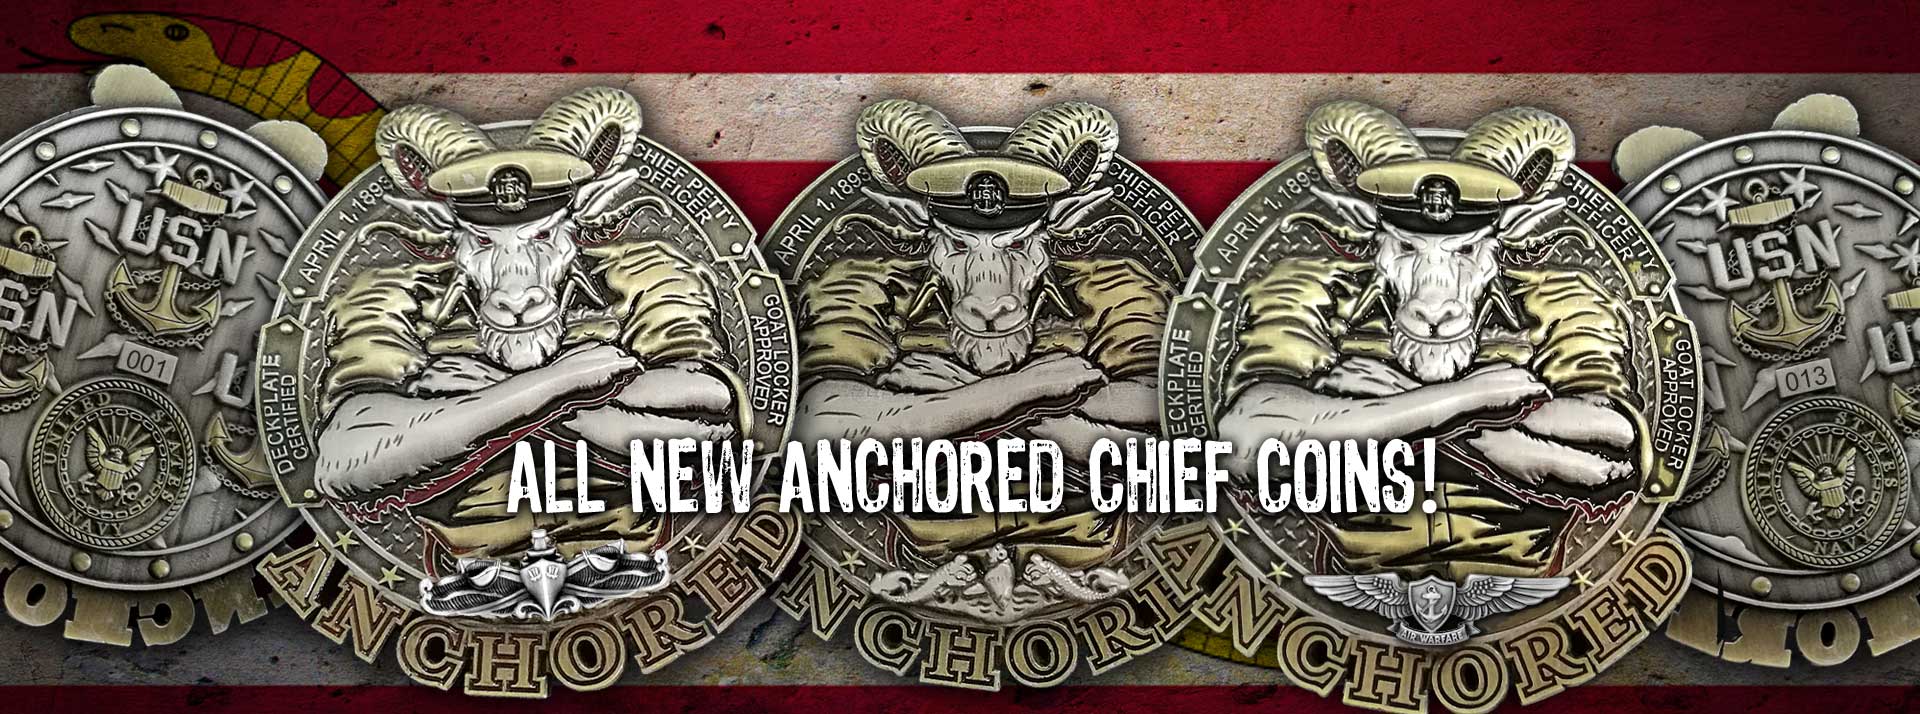 US Navy Chief And Goat Locker Challenge Coins